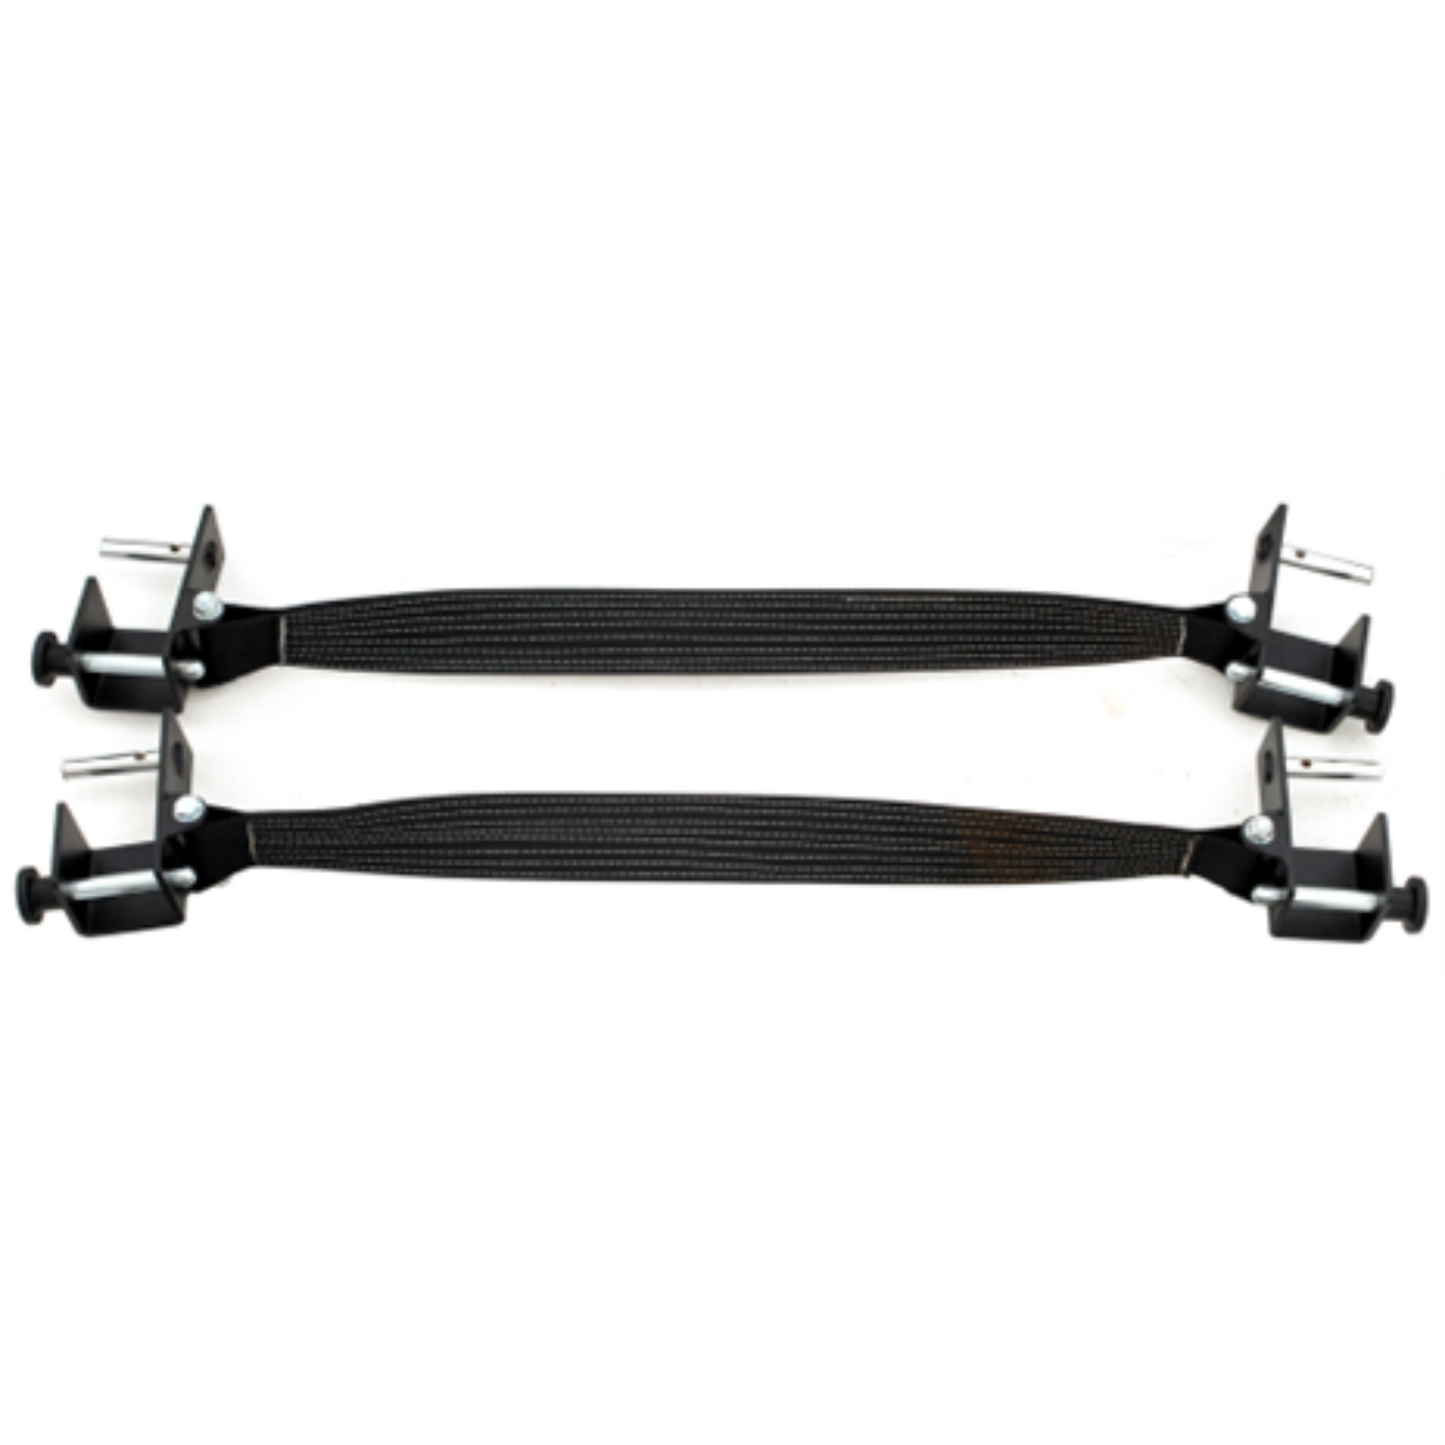 Muscle Motion PR1012 Safety Strap System Attachment-Gym Direct